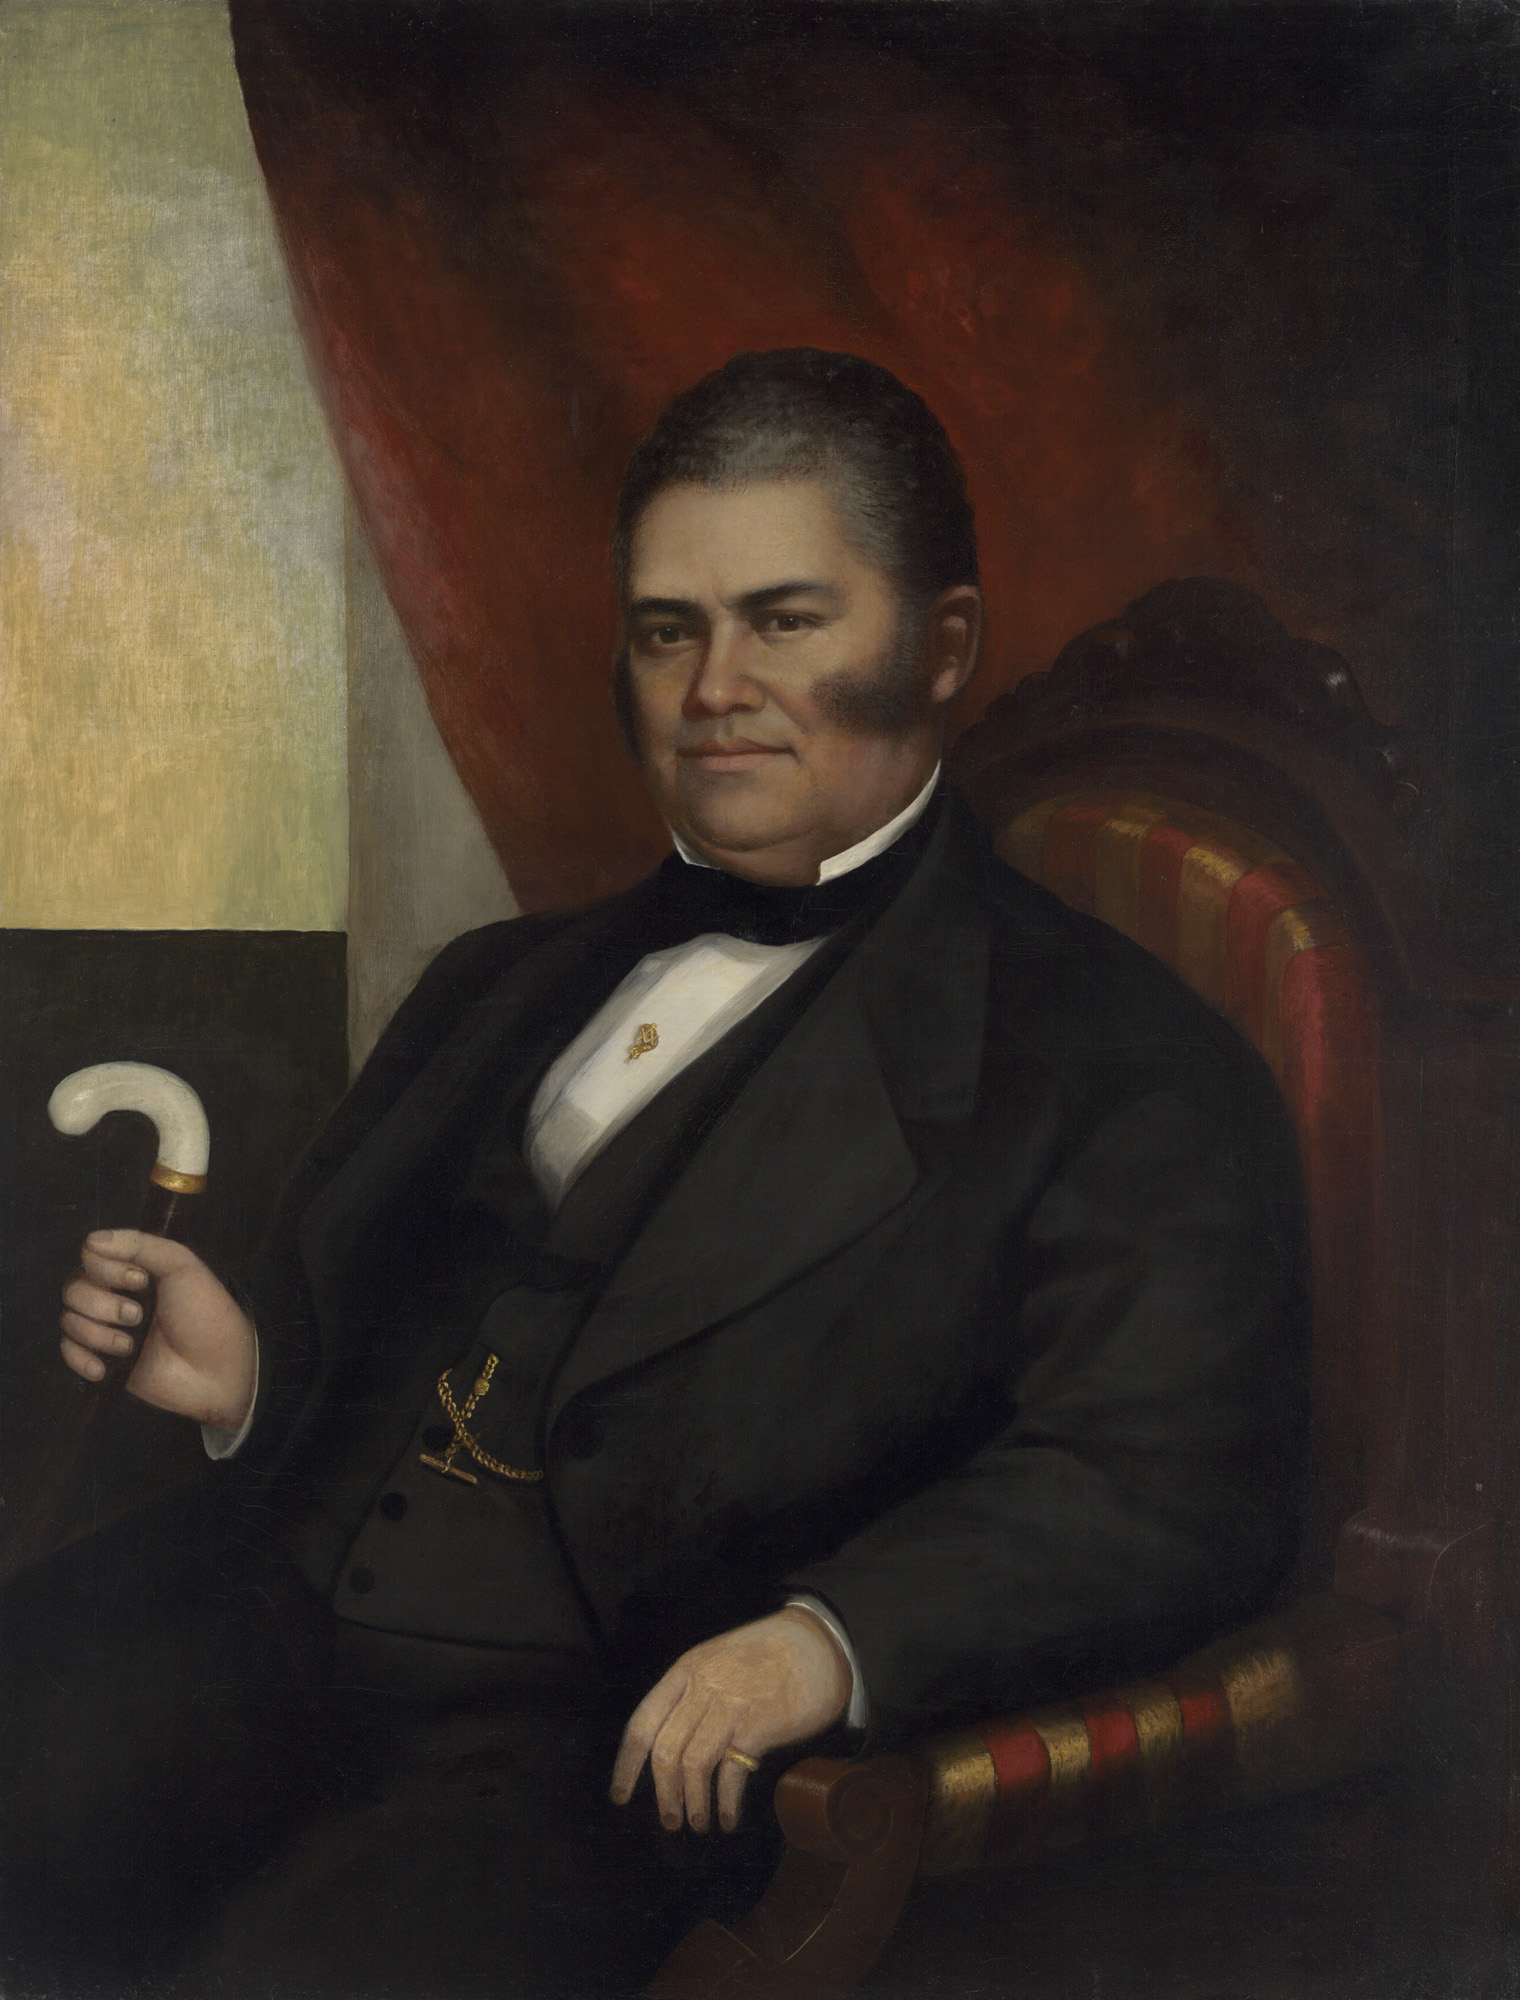 Aaron E. Darling, John Jones, c. 1865, oil on canvas, 46 x 36 inches (Chicago History Museum)